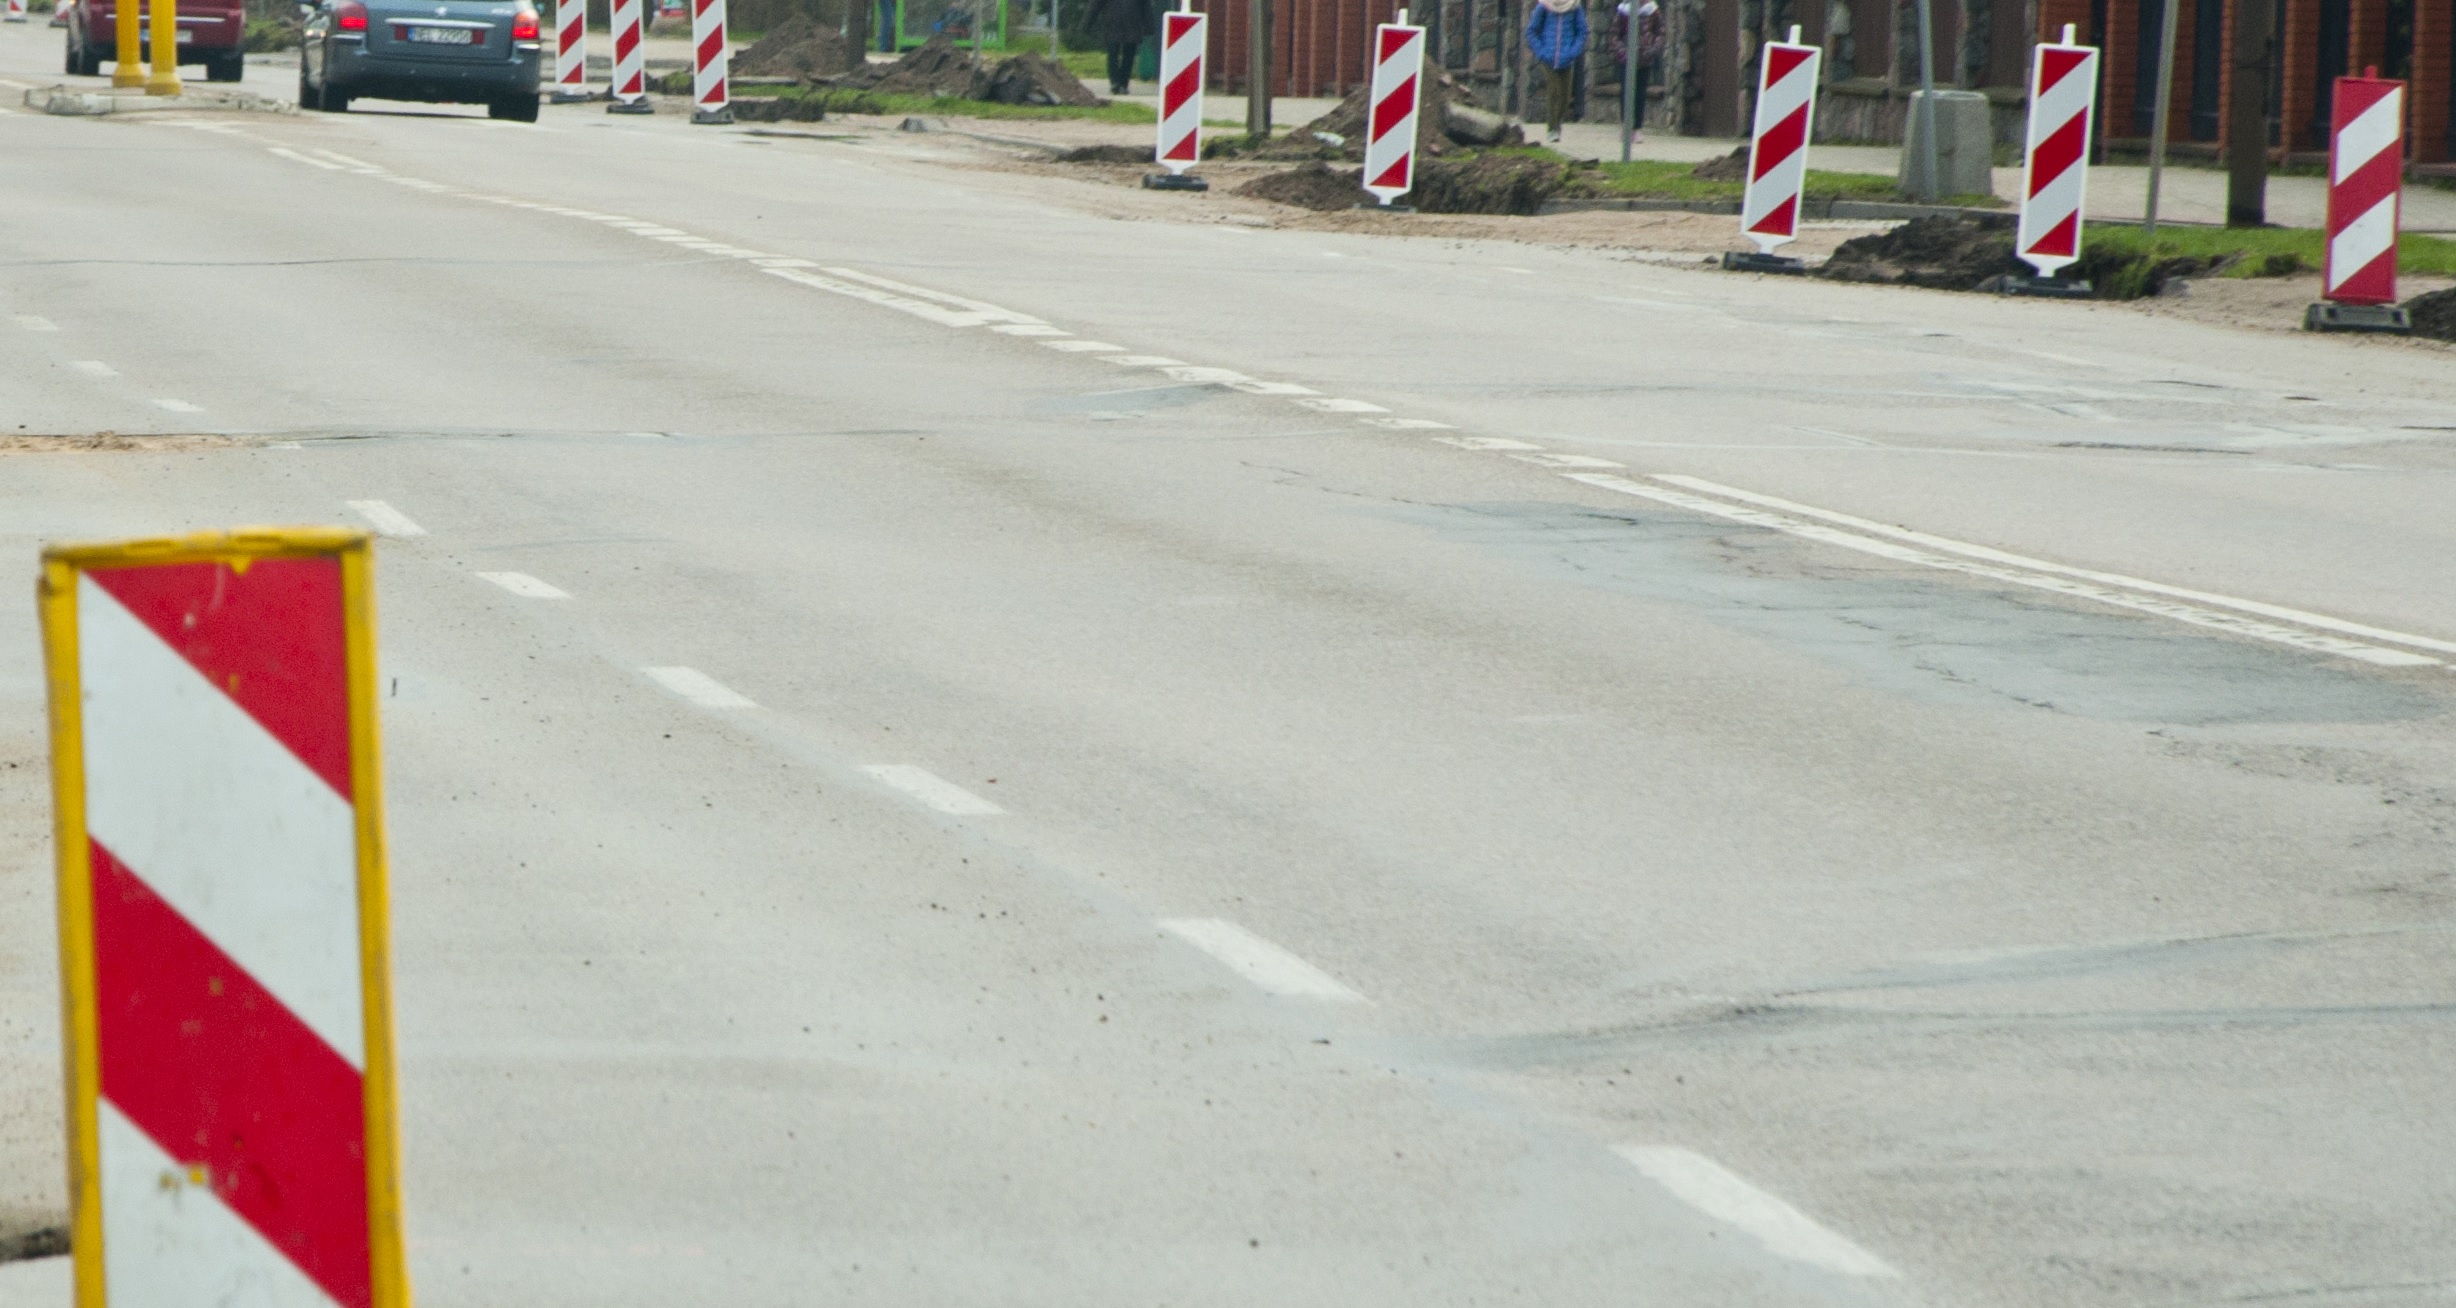 Work is ongoing on a closed Street Łukasiewicz in ełk